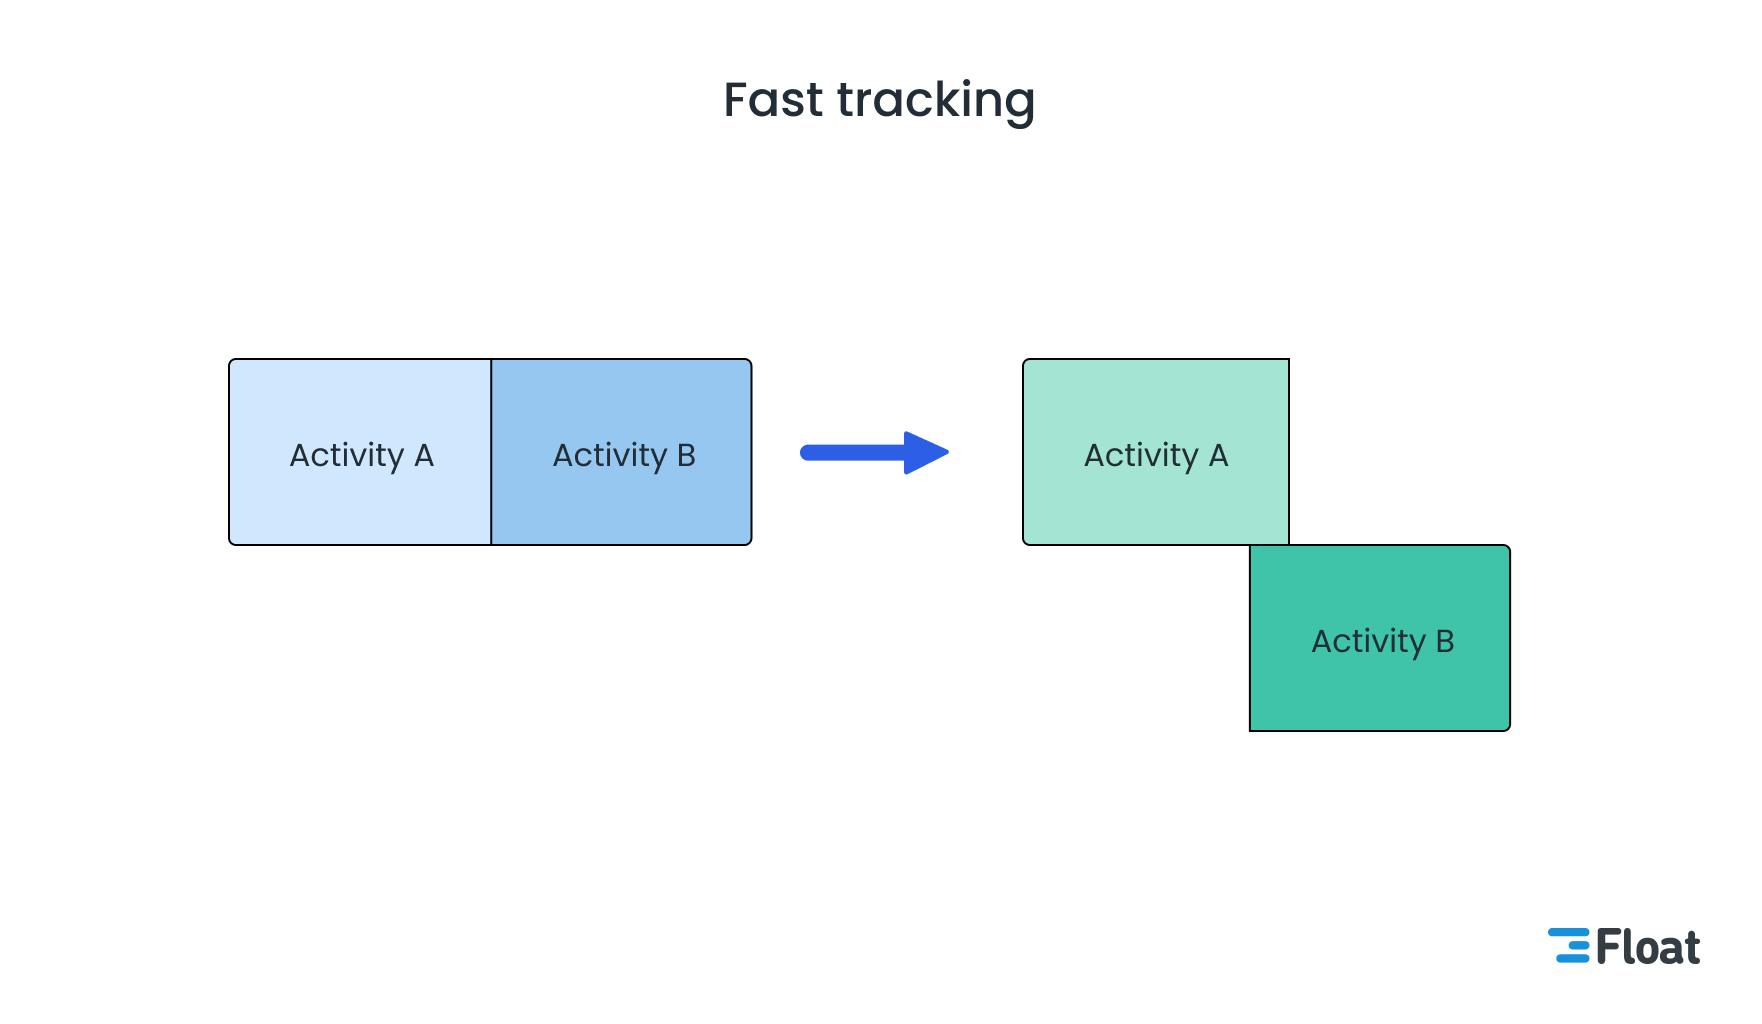 An illustration showing fast tracking 